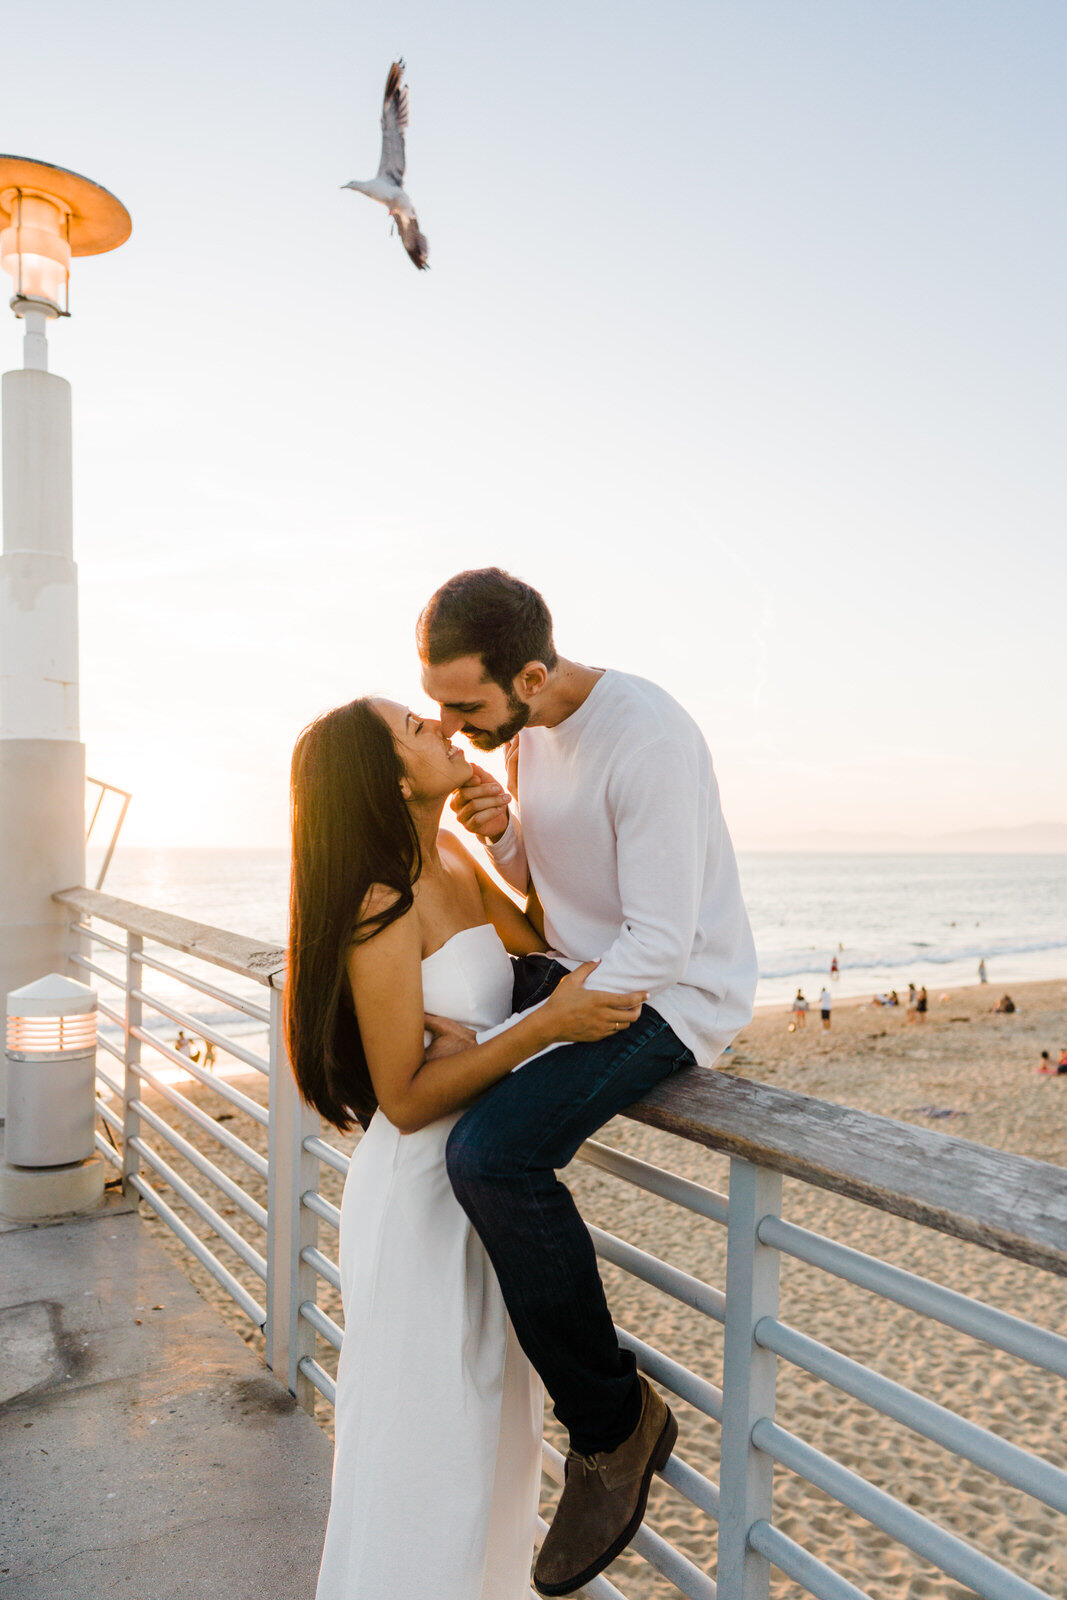 romantic engagement photo at hermosa beach pier with bird flying in background at sunset